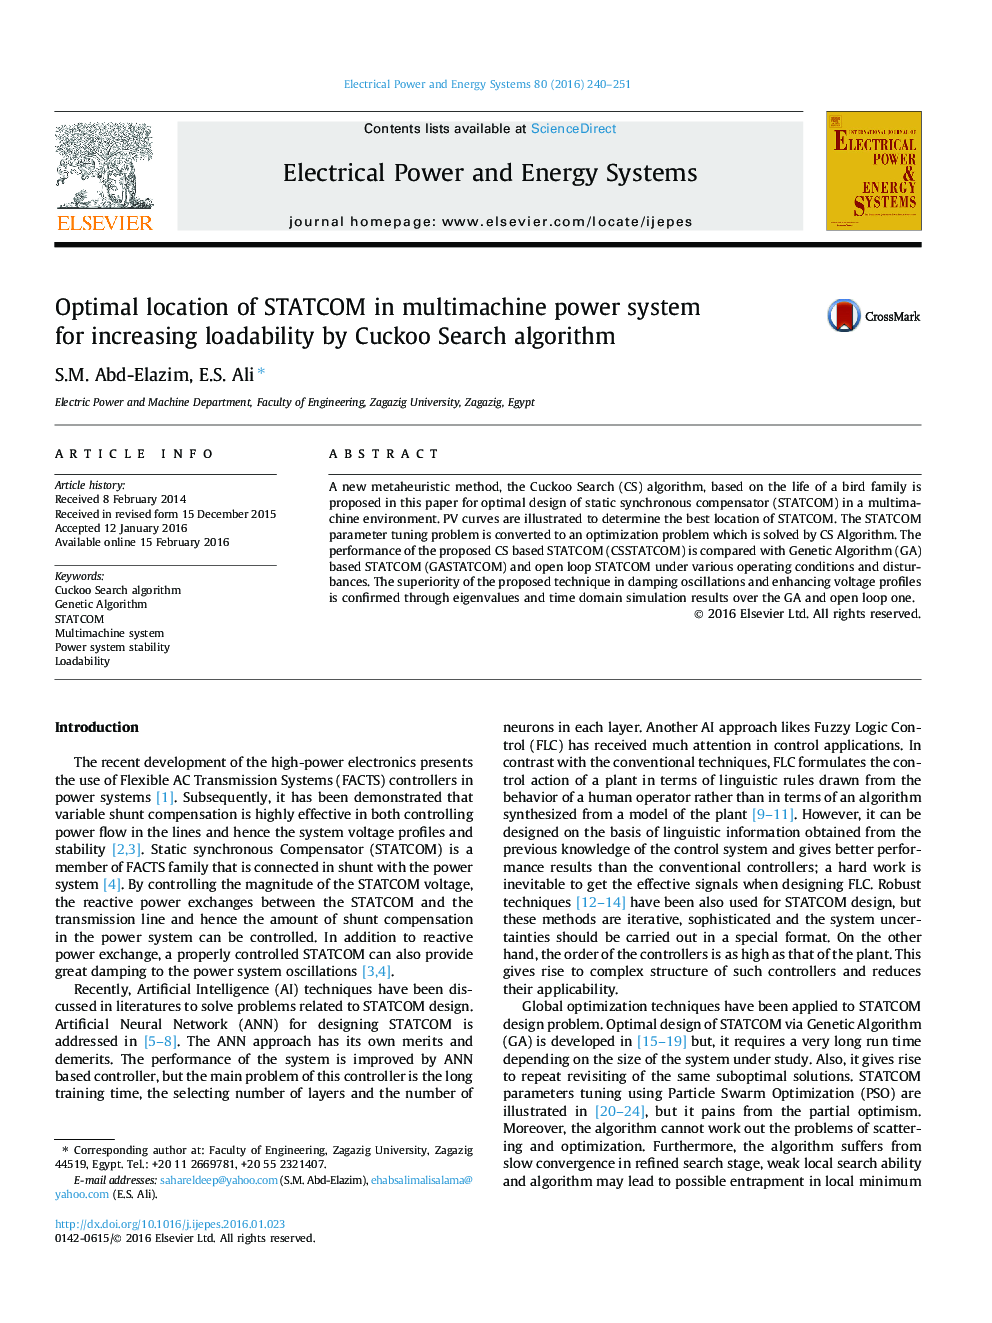 Optimal location of STATCOM in multimachine power system for increasing loadability by Cuckoo Search algorithm